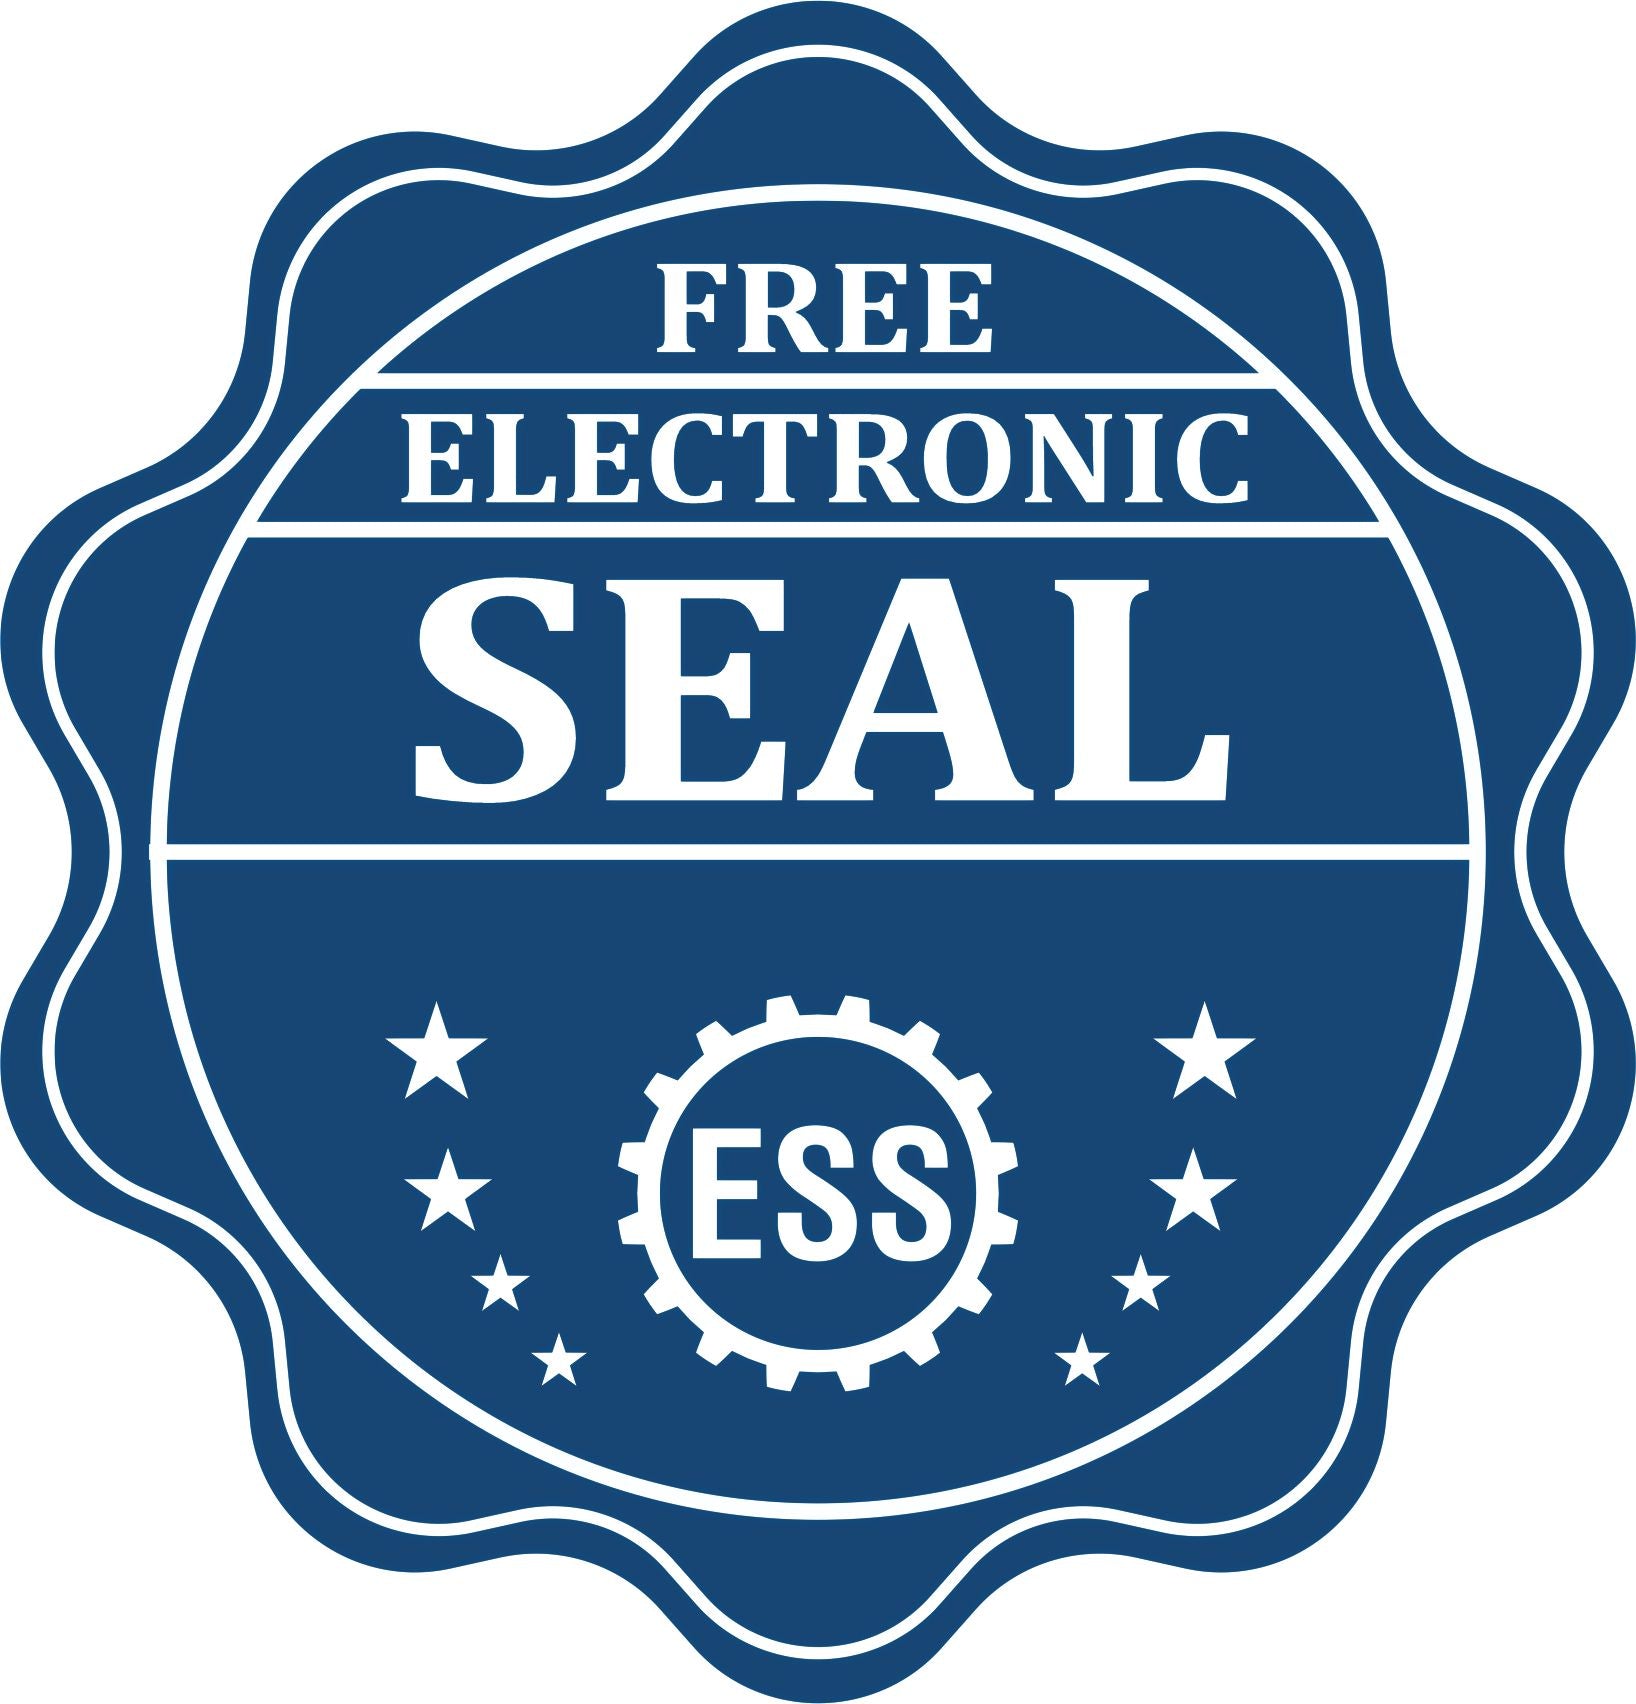 A badge showing a free electronic seal for the Heavy Duty Cast Iron Louisiana Land Surveyor Seal Embosser with stars and the ESS gear on the emblem.